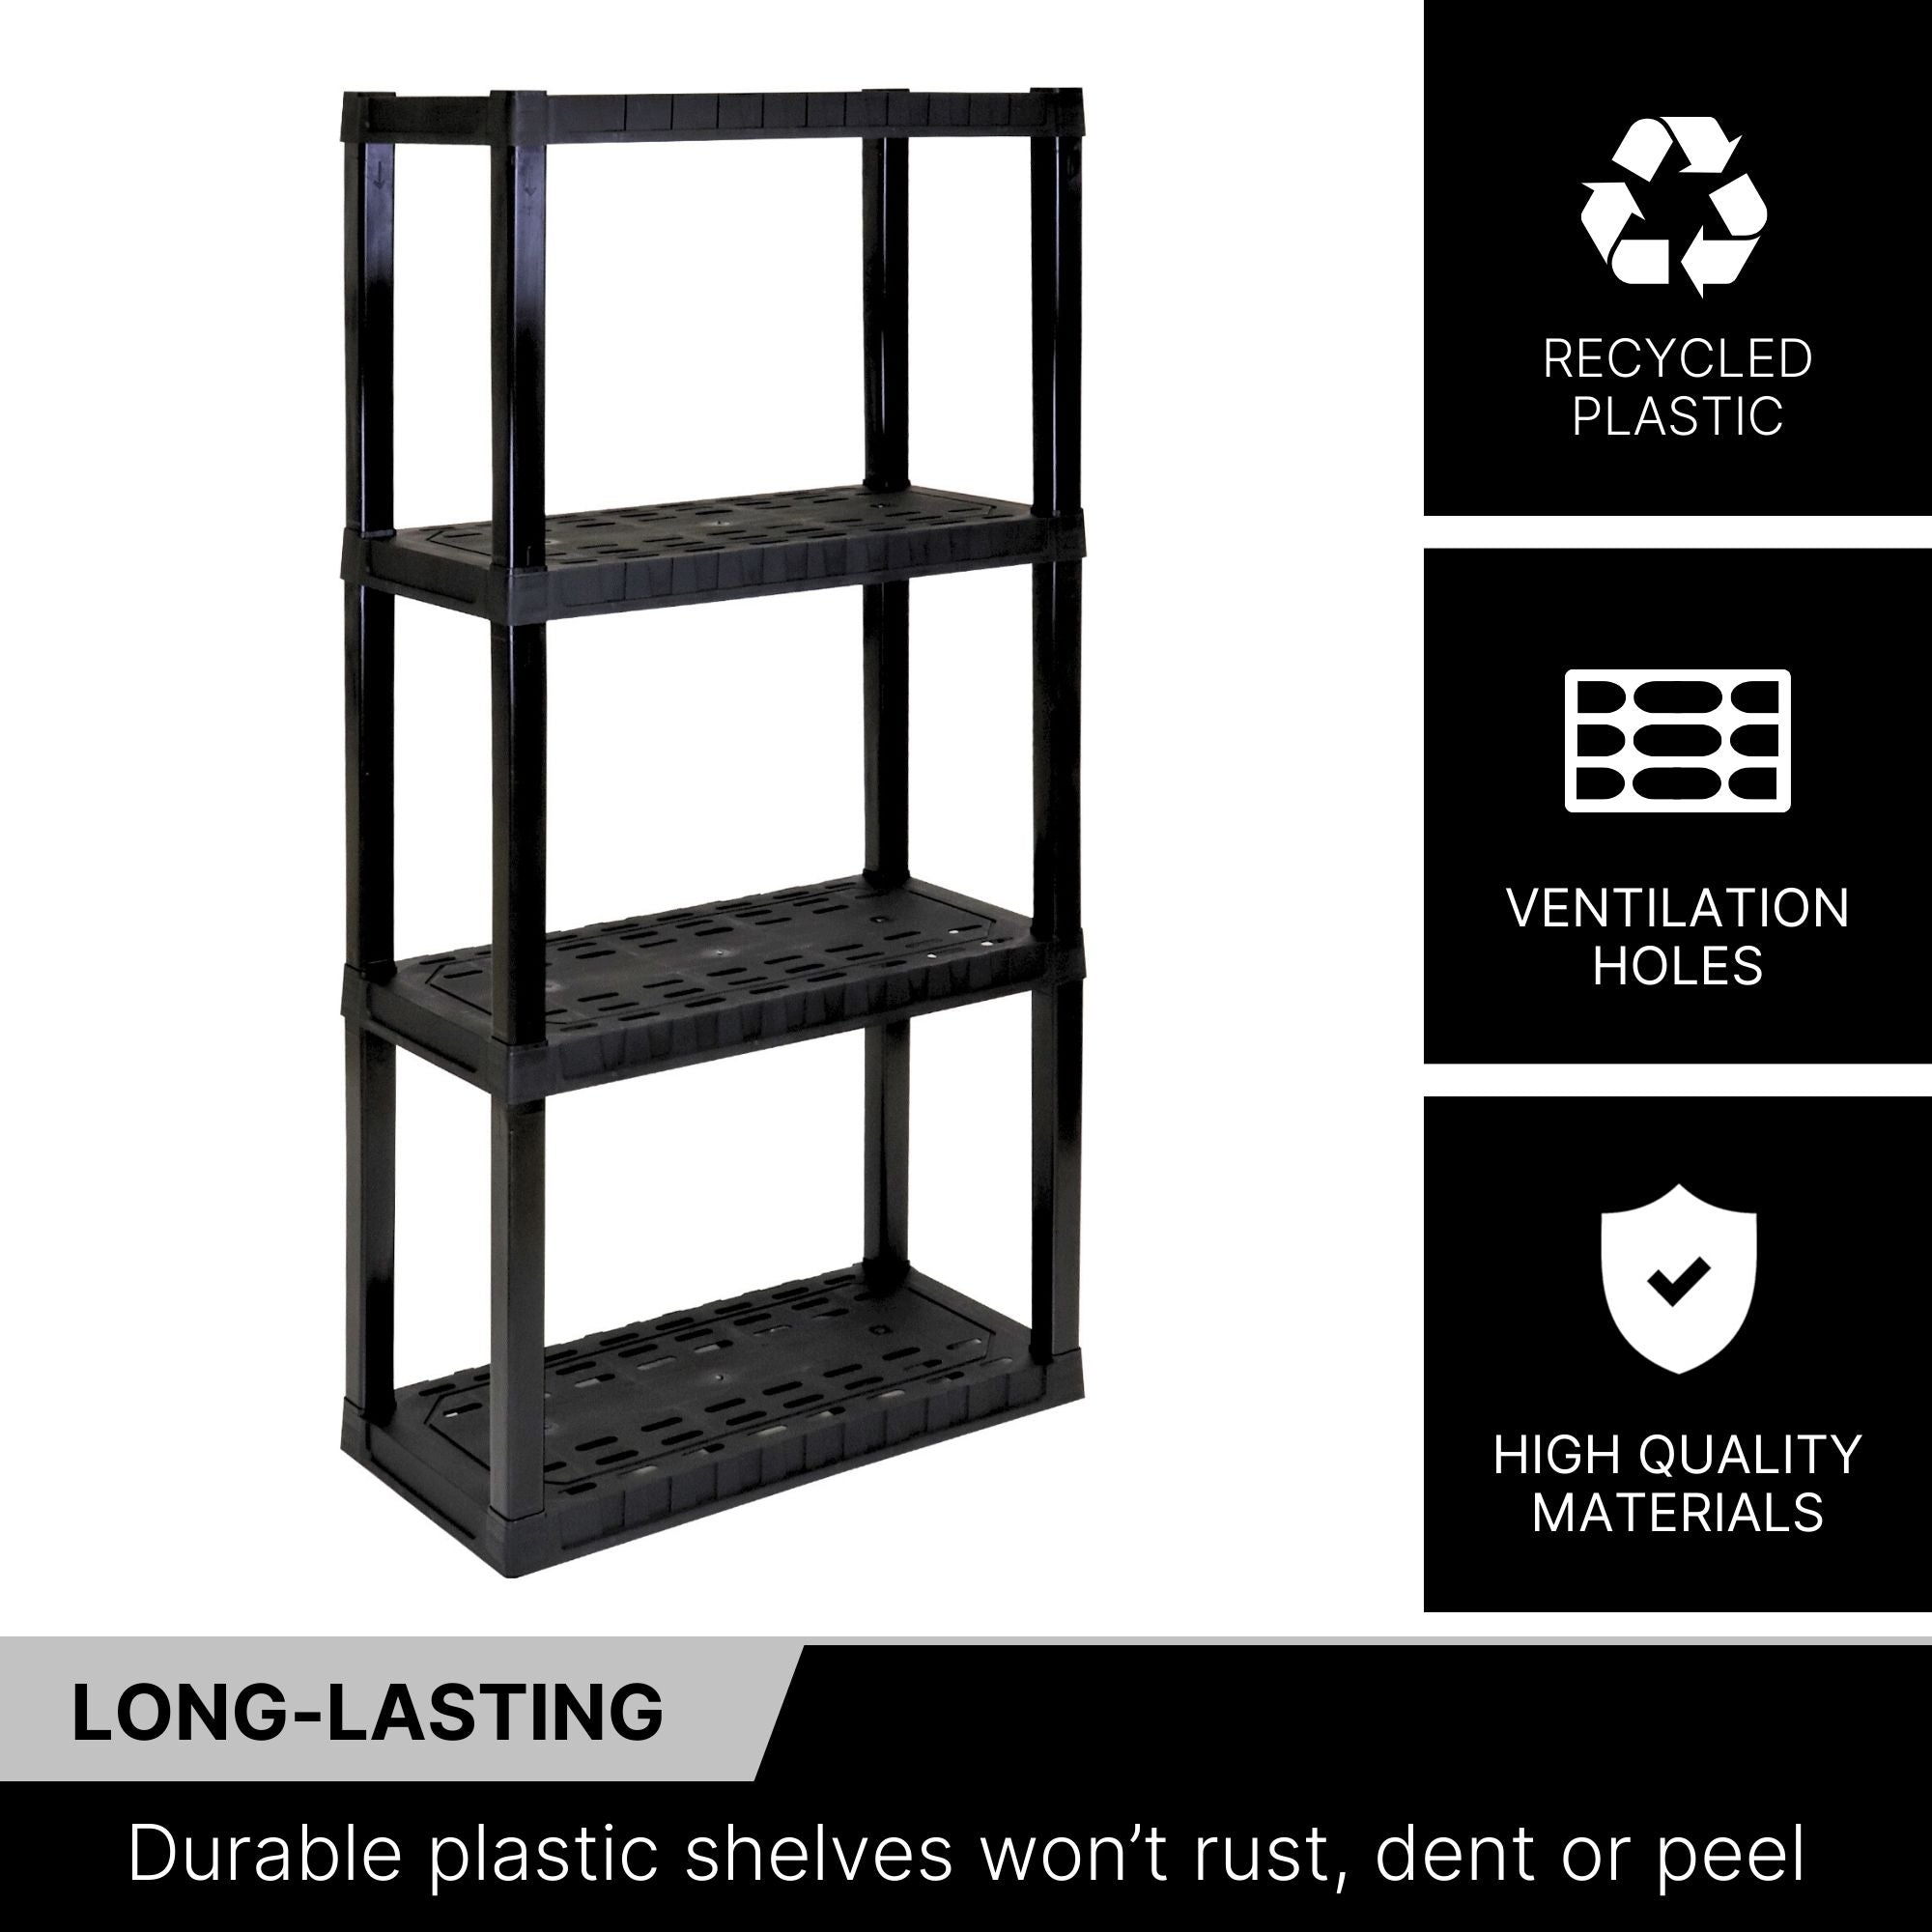 Oskar 4-tier shelf unit on a white background with text and icons to the right describing features: Recycled plastic; ventilation holes; high quality materials. Text below reads,"Long-lasting: Durable plastic shelves won’t rust, dent or peel"